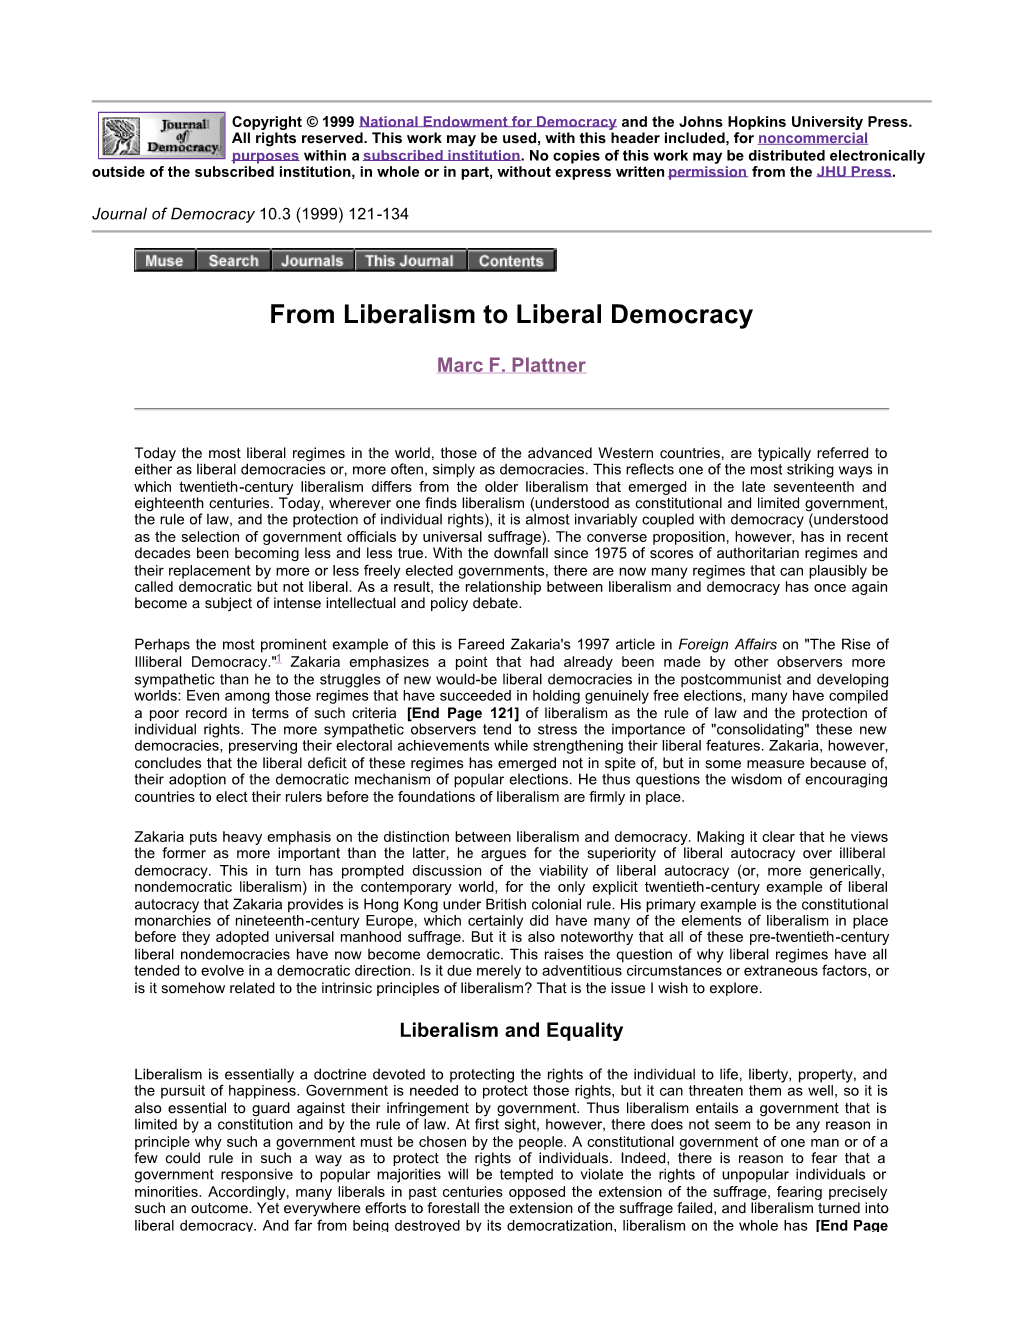 From Liberalism to Liberal Democracy